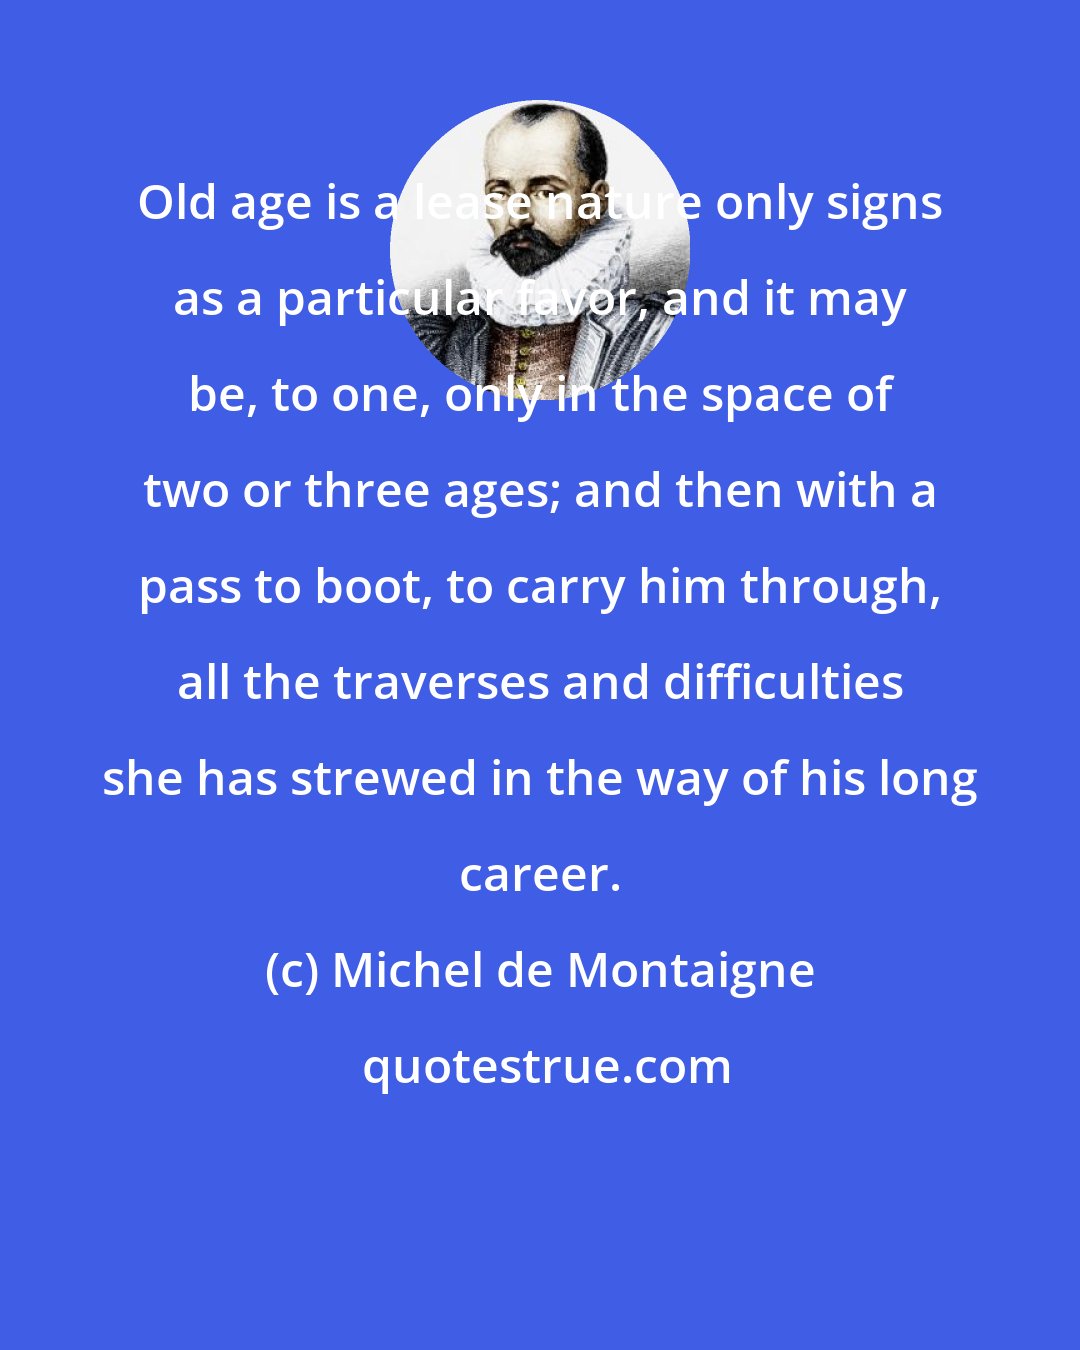 Michel de Montaigne: Old age is a lease nature only signs as a particular favor, and it may be, to one, only in the space of two or three ages; and then with a pass to boot, to carry him through, all the traverses and difficulties she has strewed in the way of his long career.